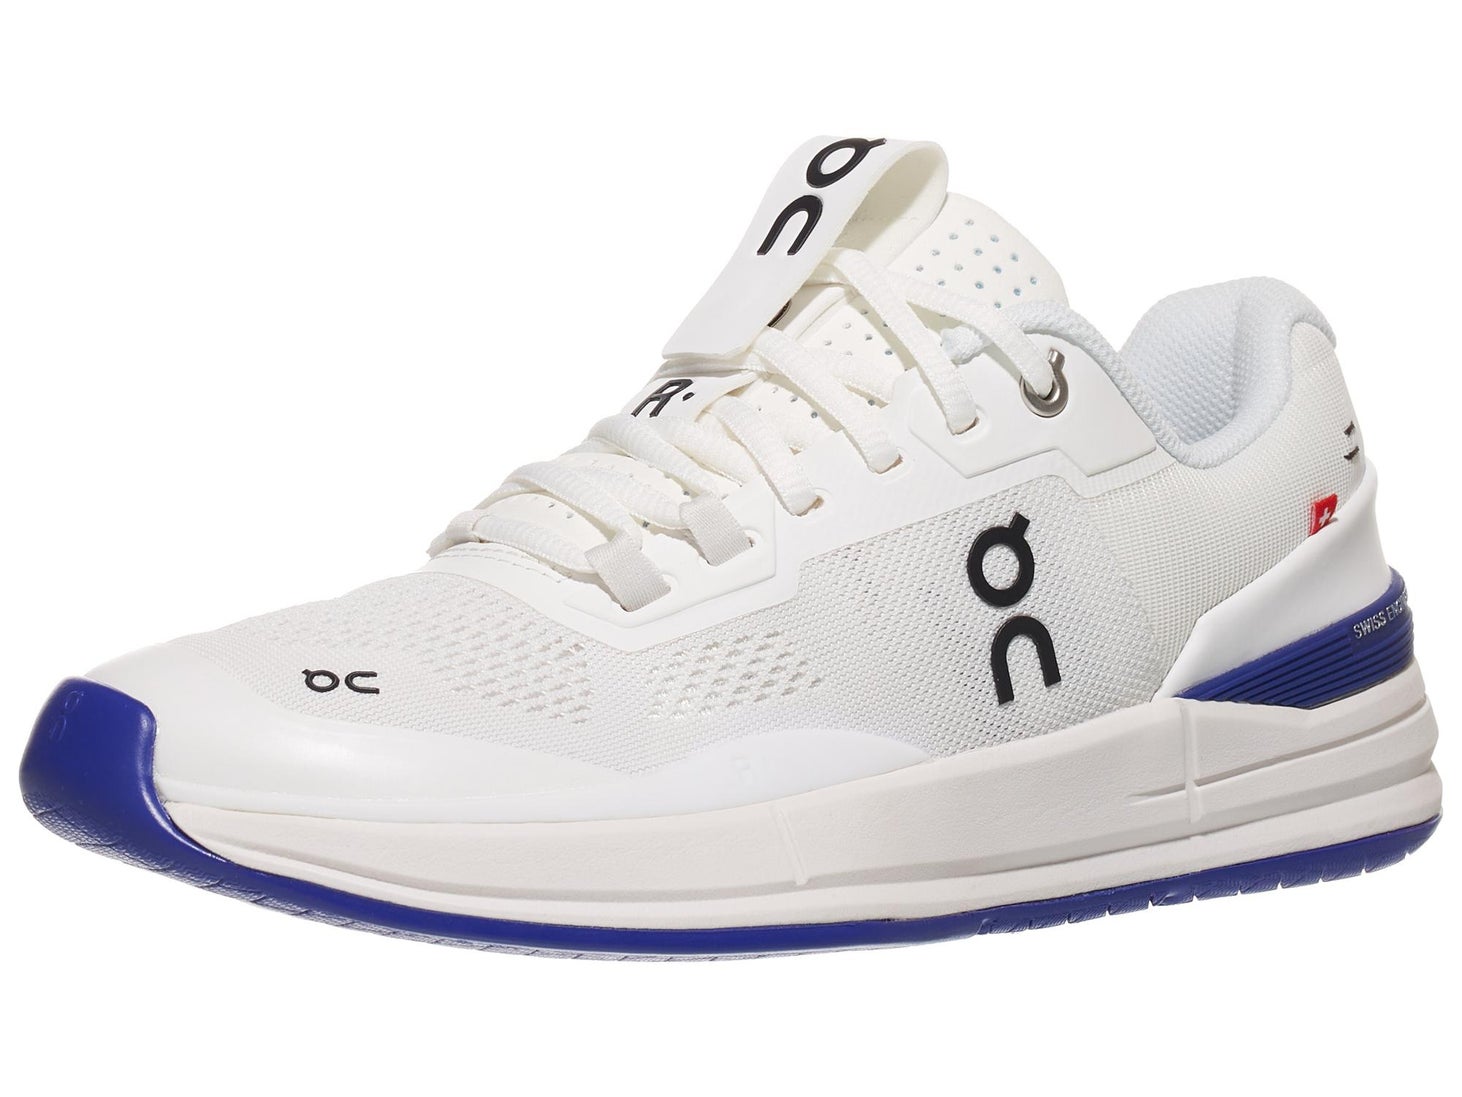 ON The Roger Pro White/Blue Women's Shoes | Tennis Warehouse